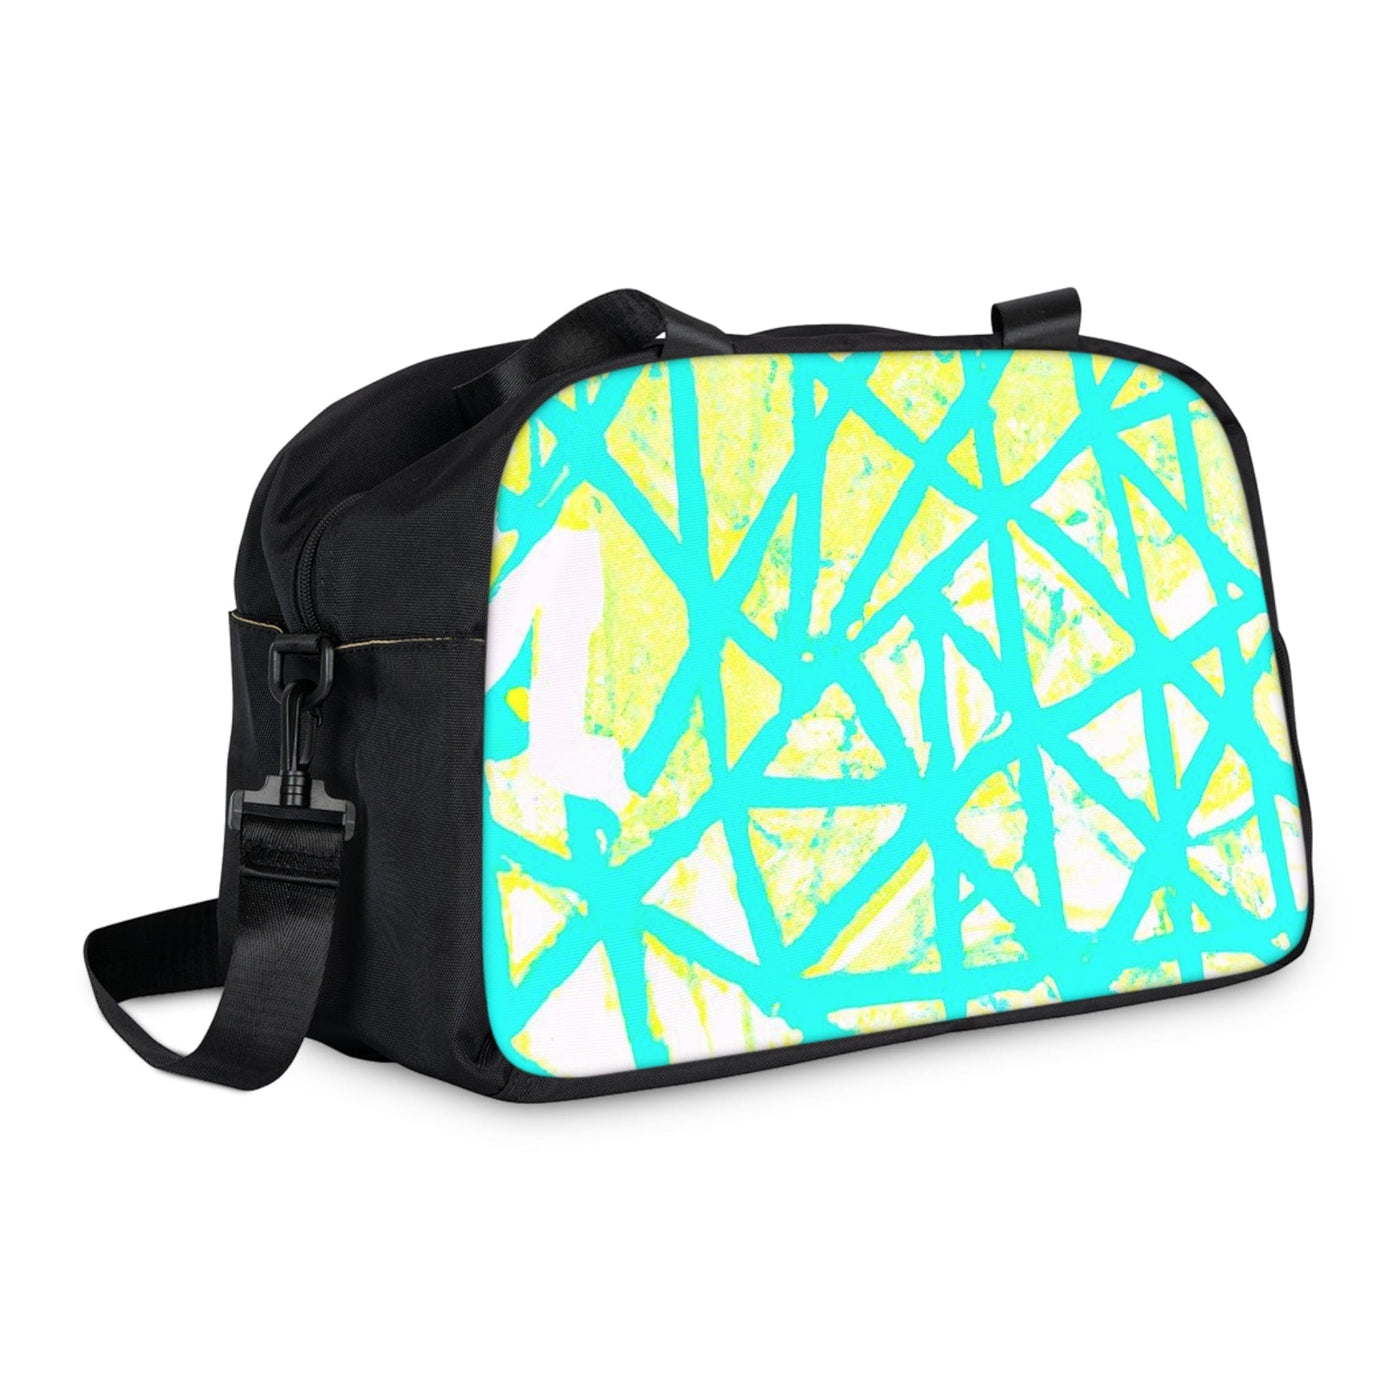 Travel Fitness Bag Cyan Blue Lime Green And White Pattern - Bags